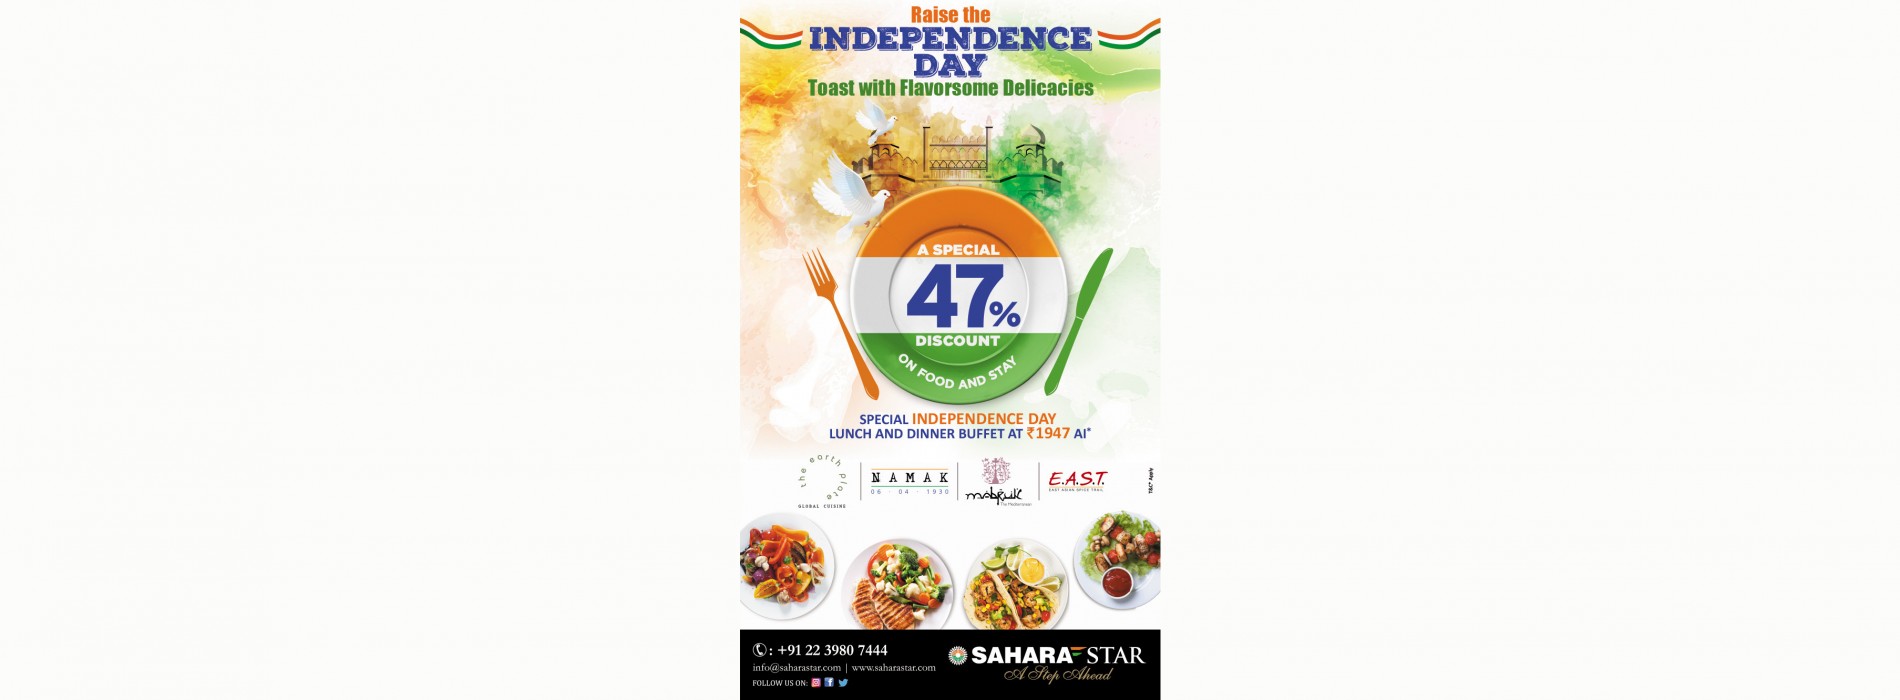 Hotel Sahara Star offers Independence Day deal